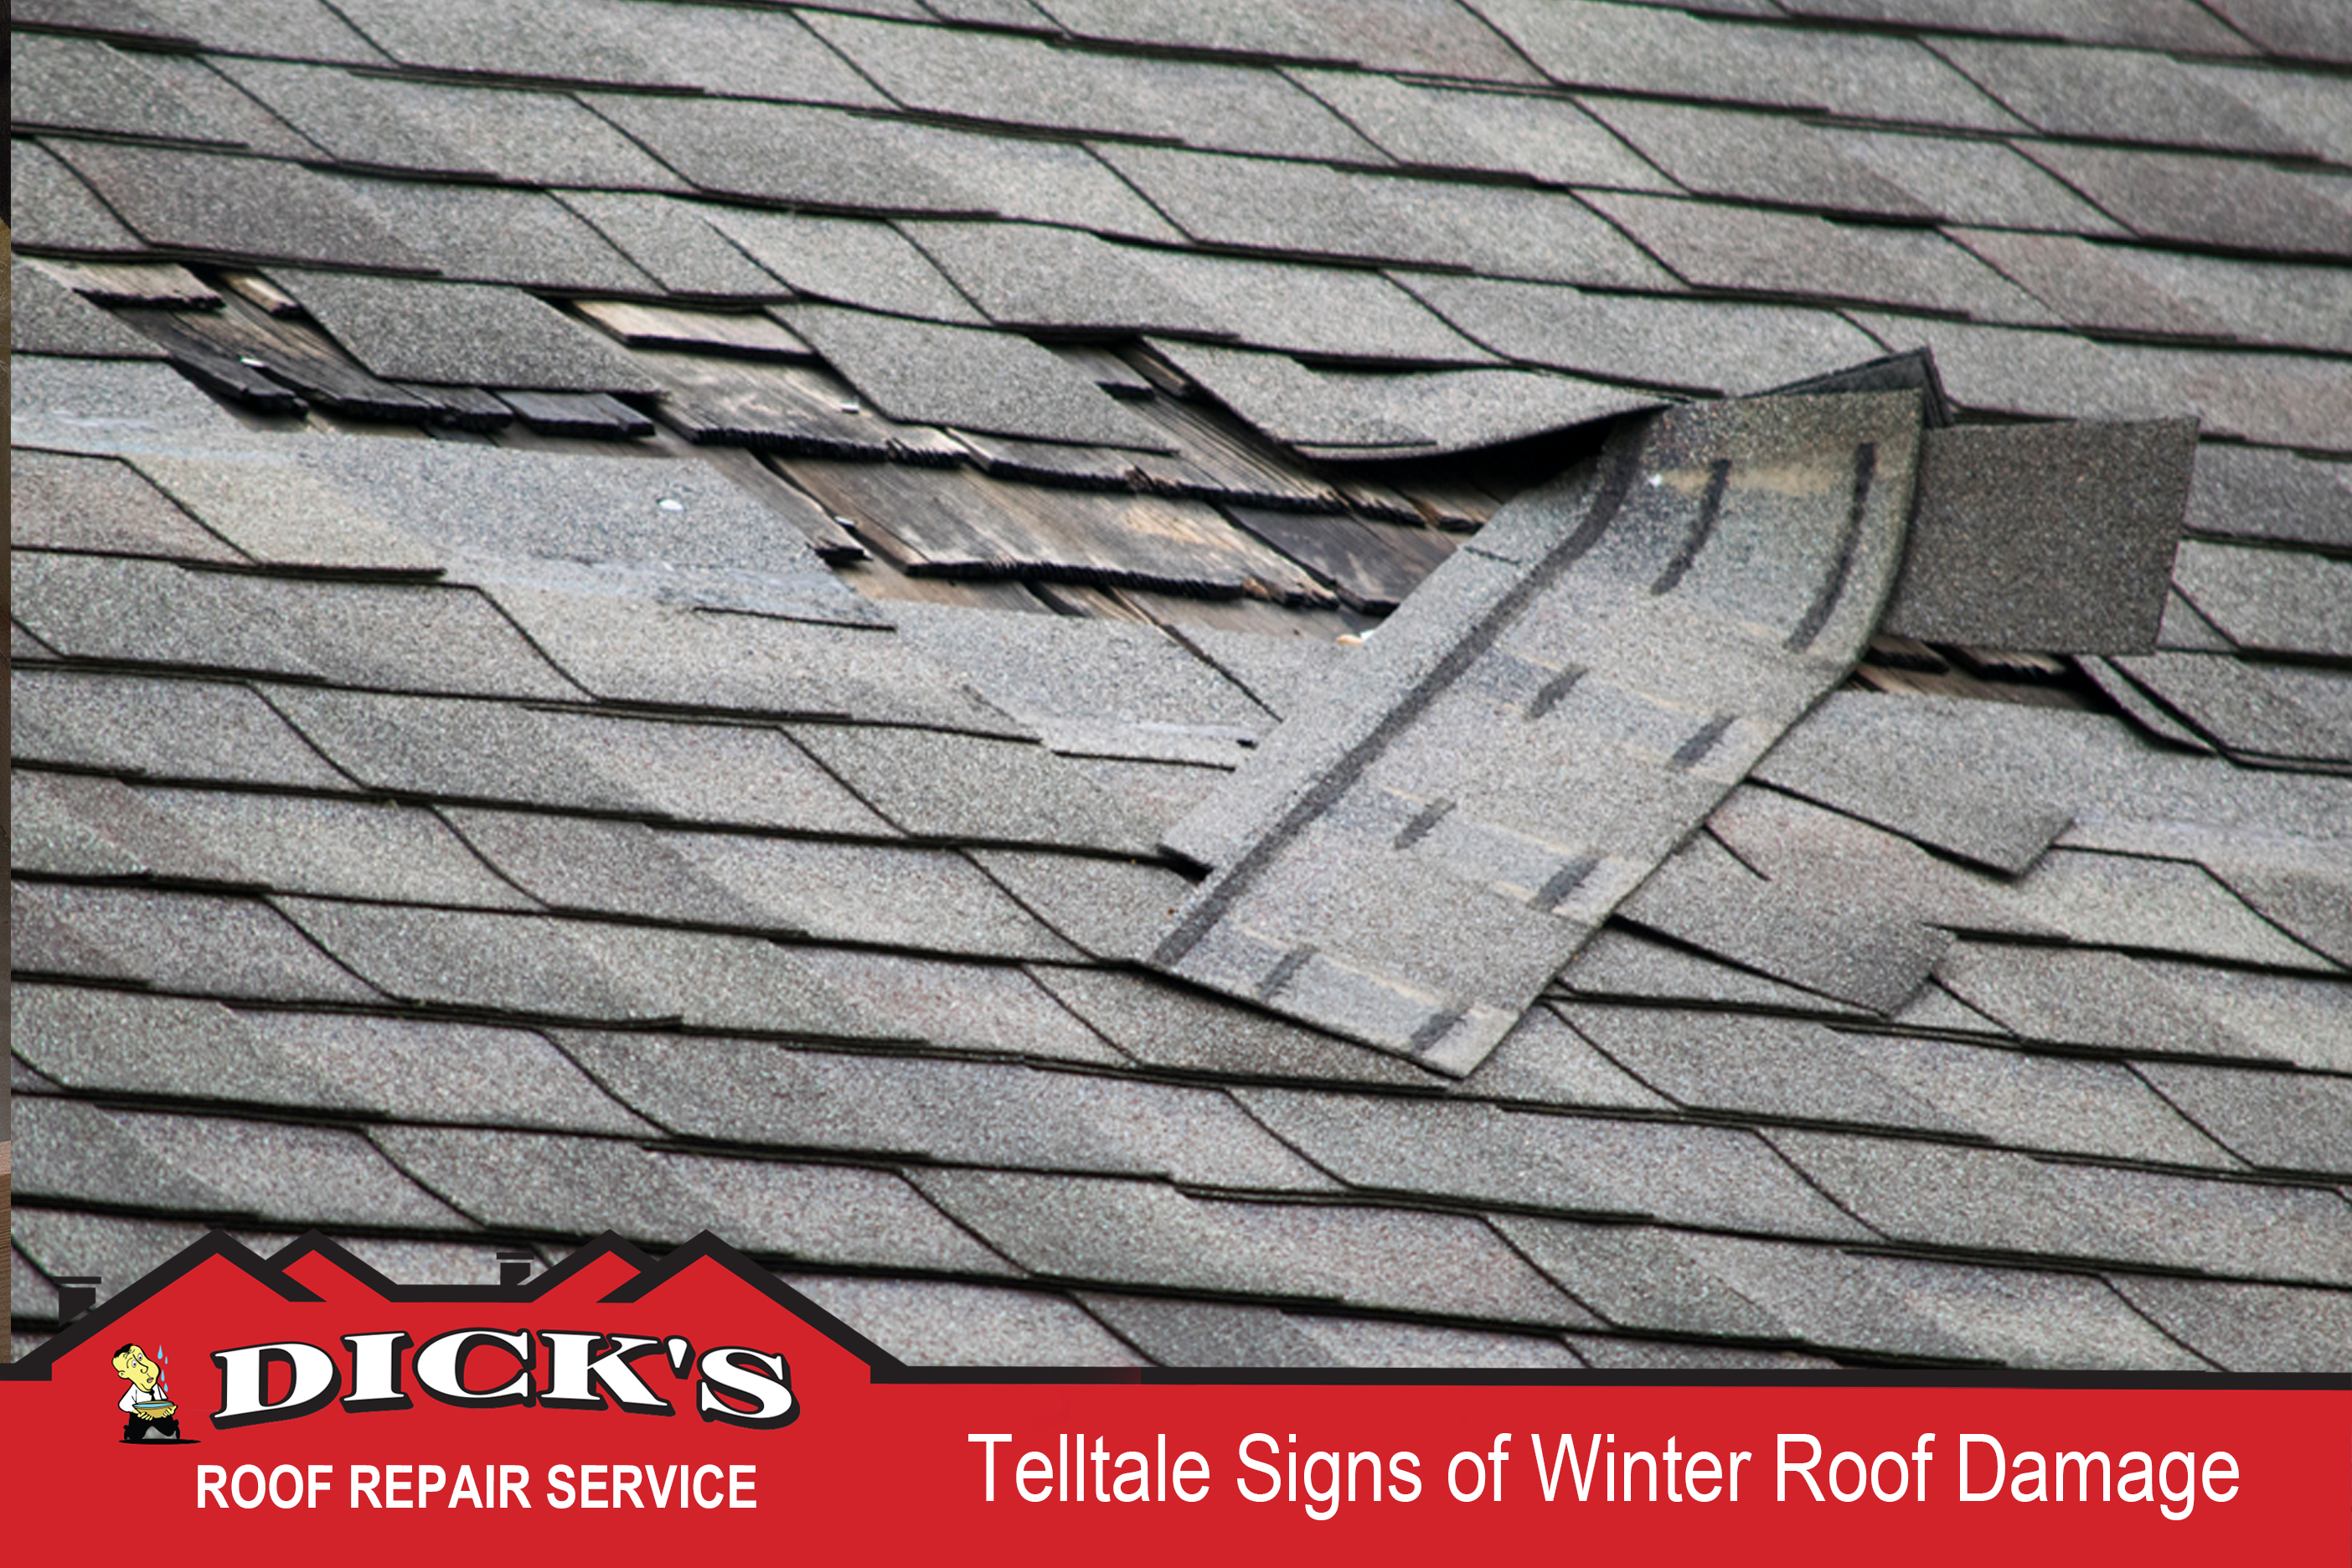 Telltale Signs of Winter Roof Damage